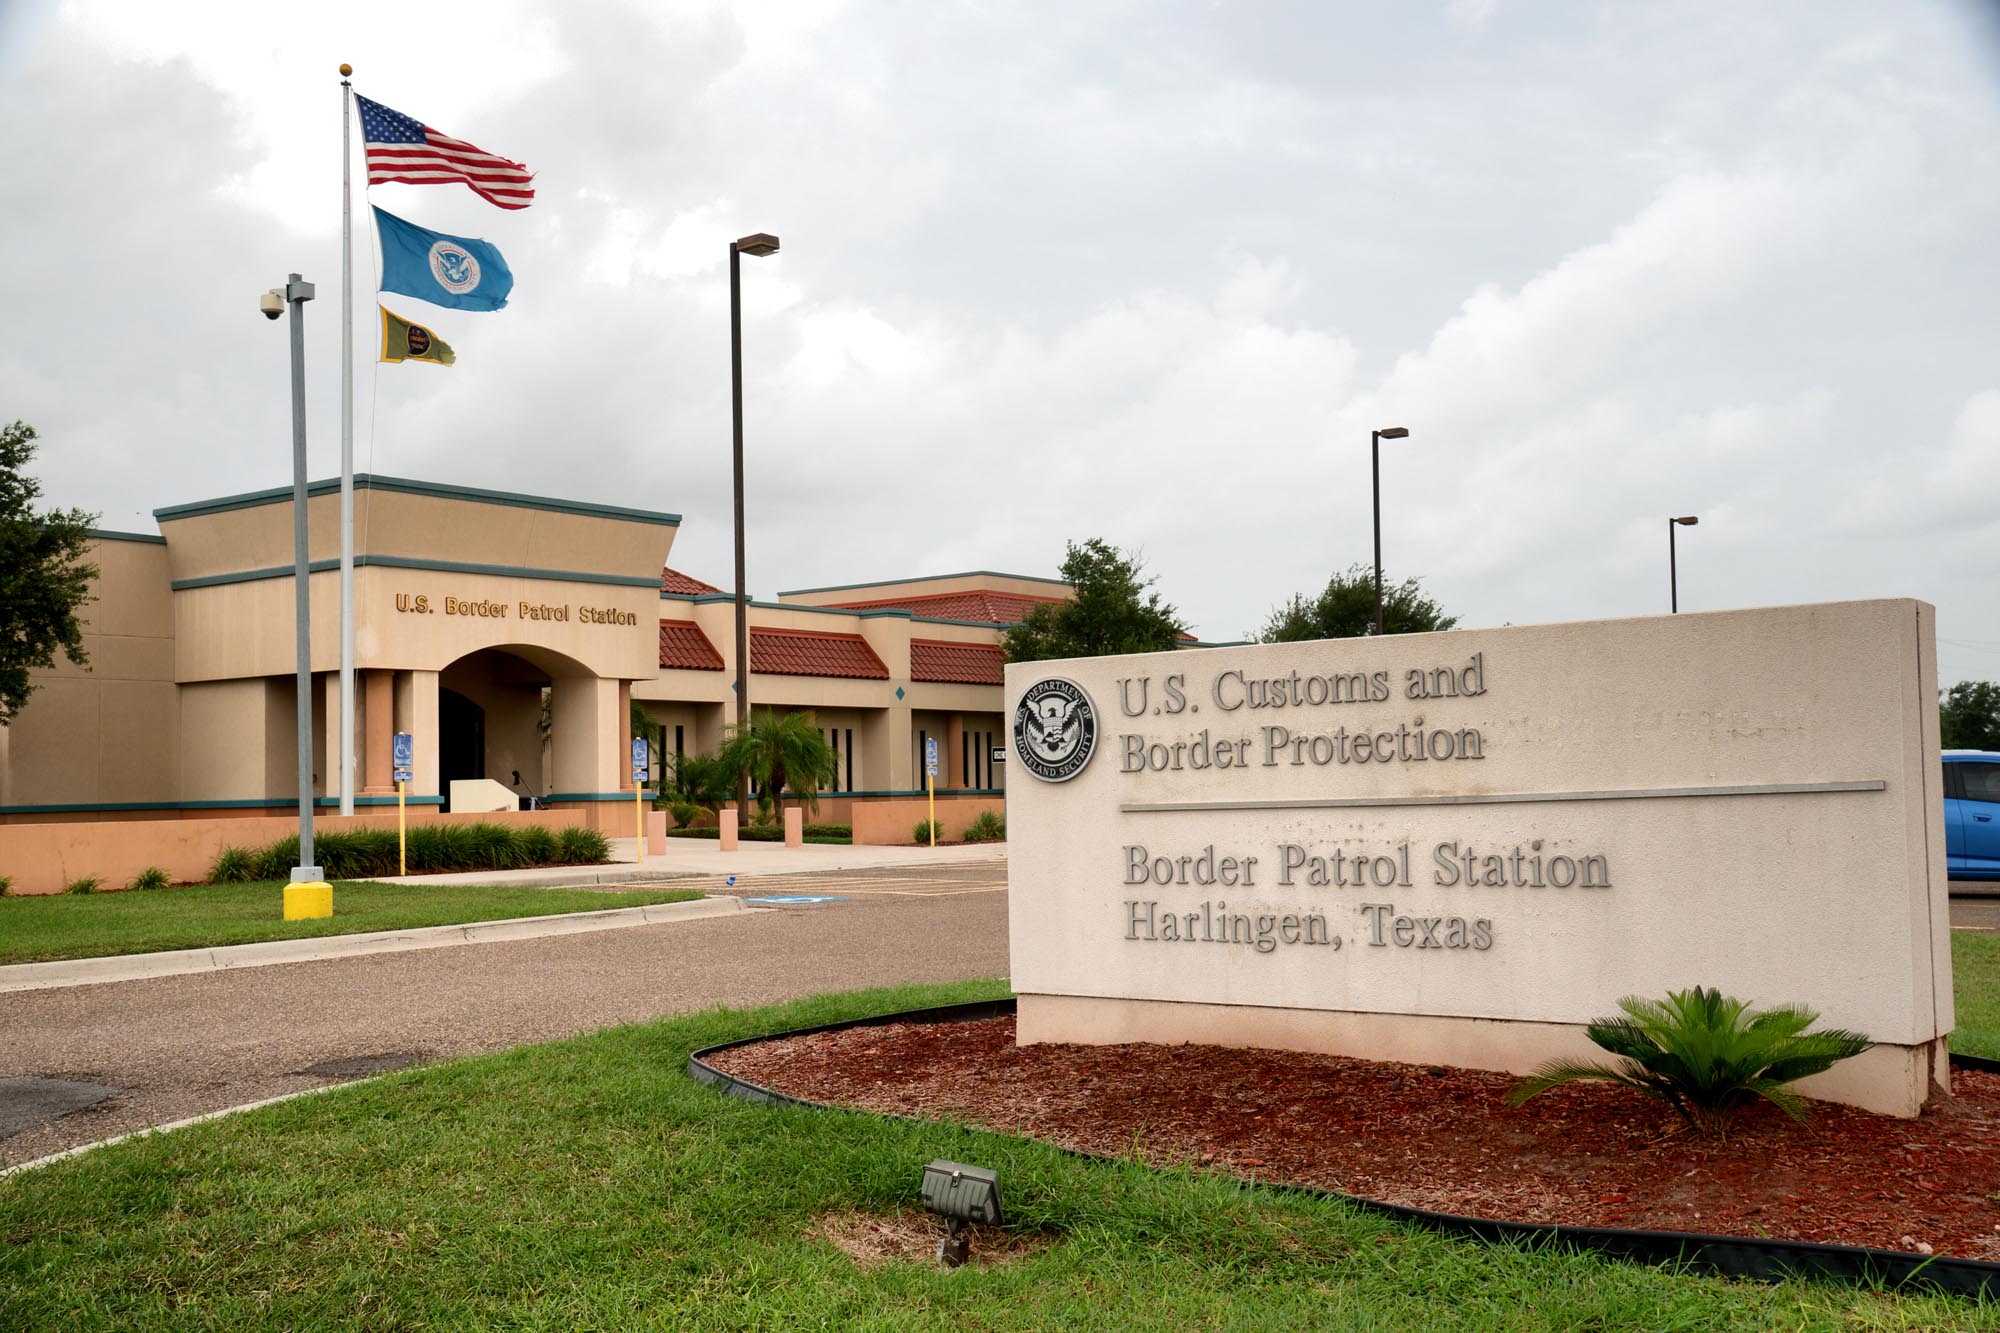 PHOTO: In this July 11, 2014, file photo, the Border Patrol station in Harlingen, Texas, is shown.